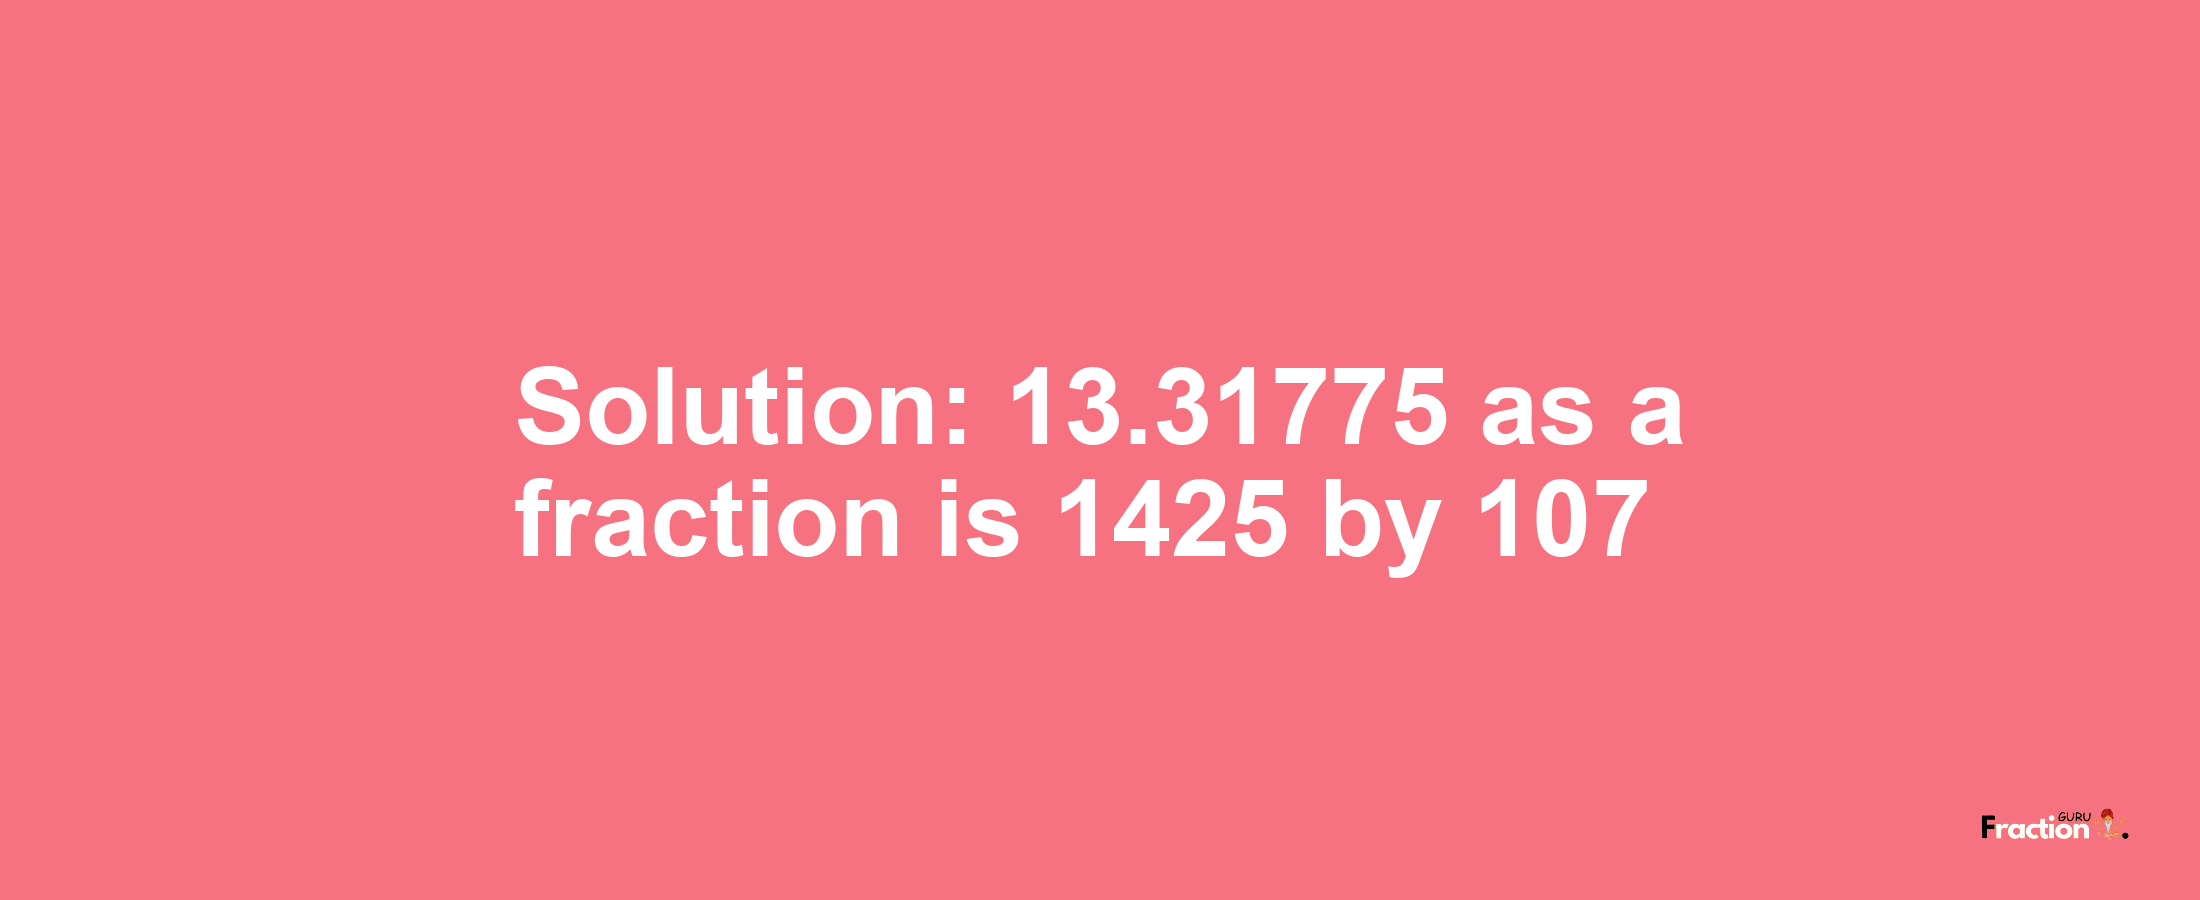 Solution:13.31775 as a fraction is 1425/107